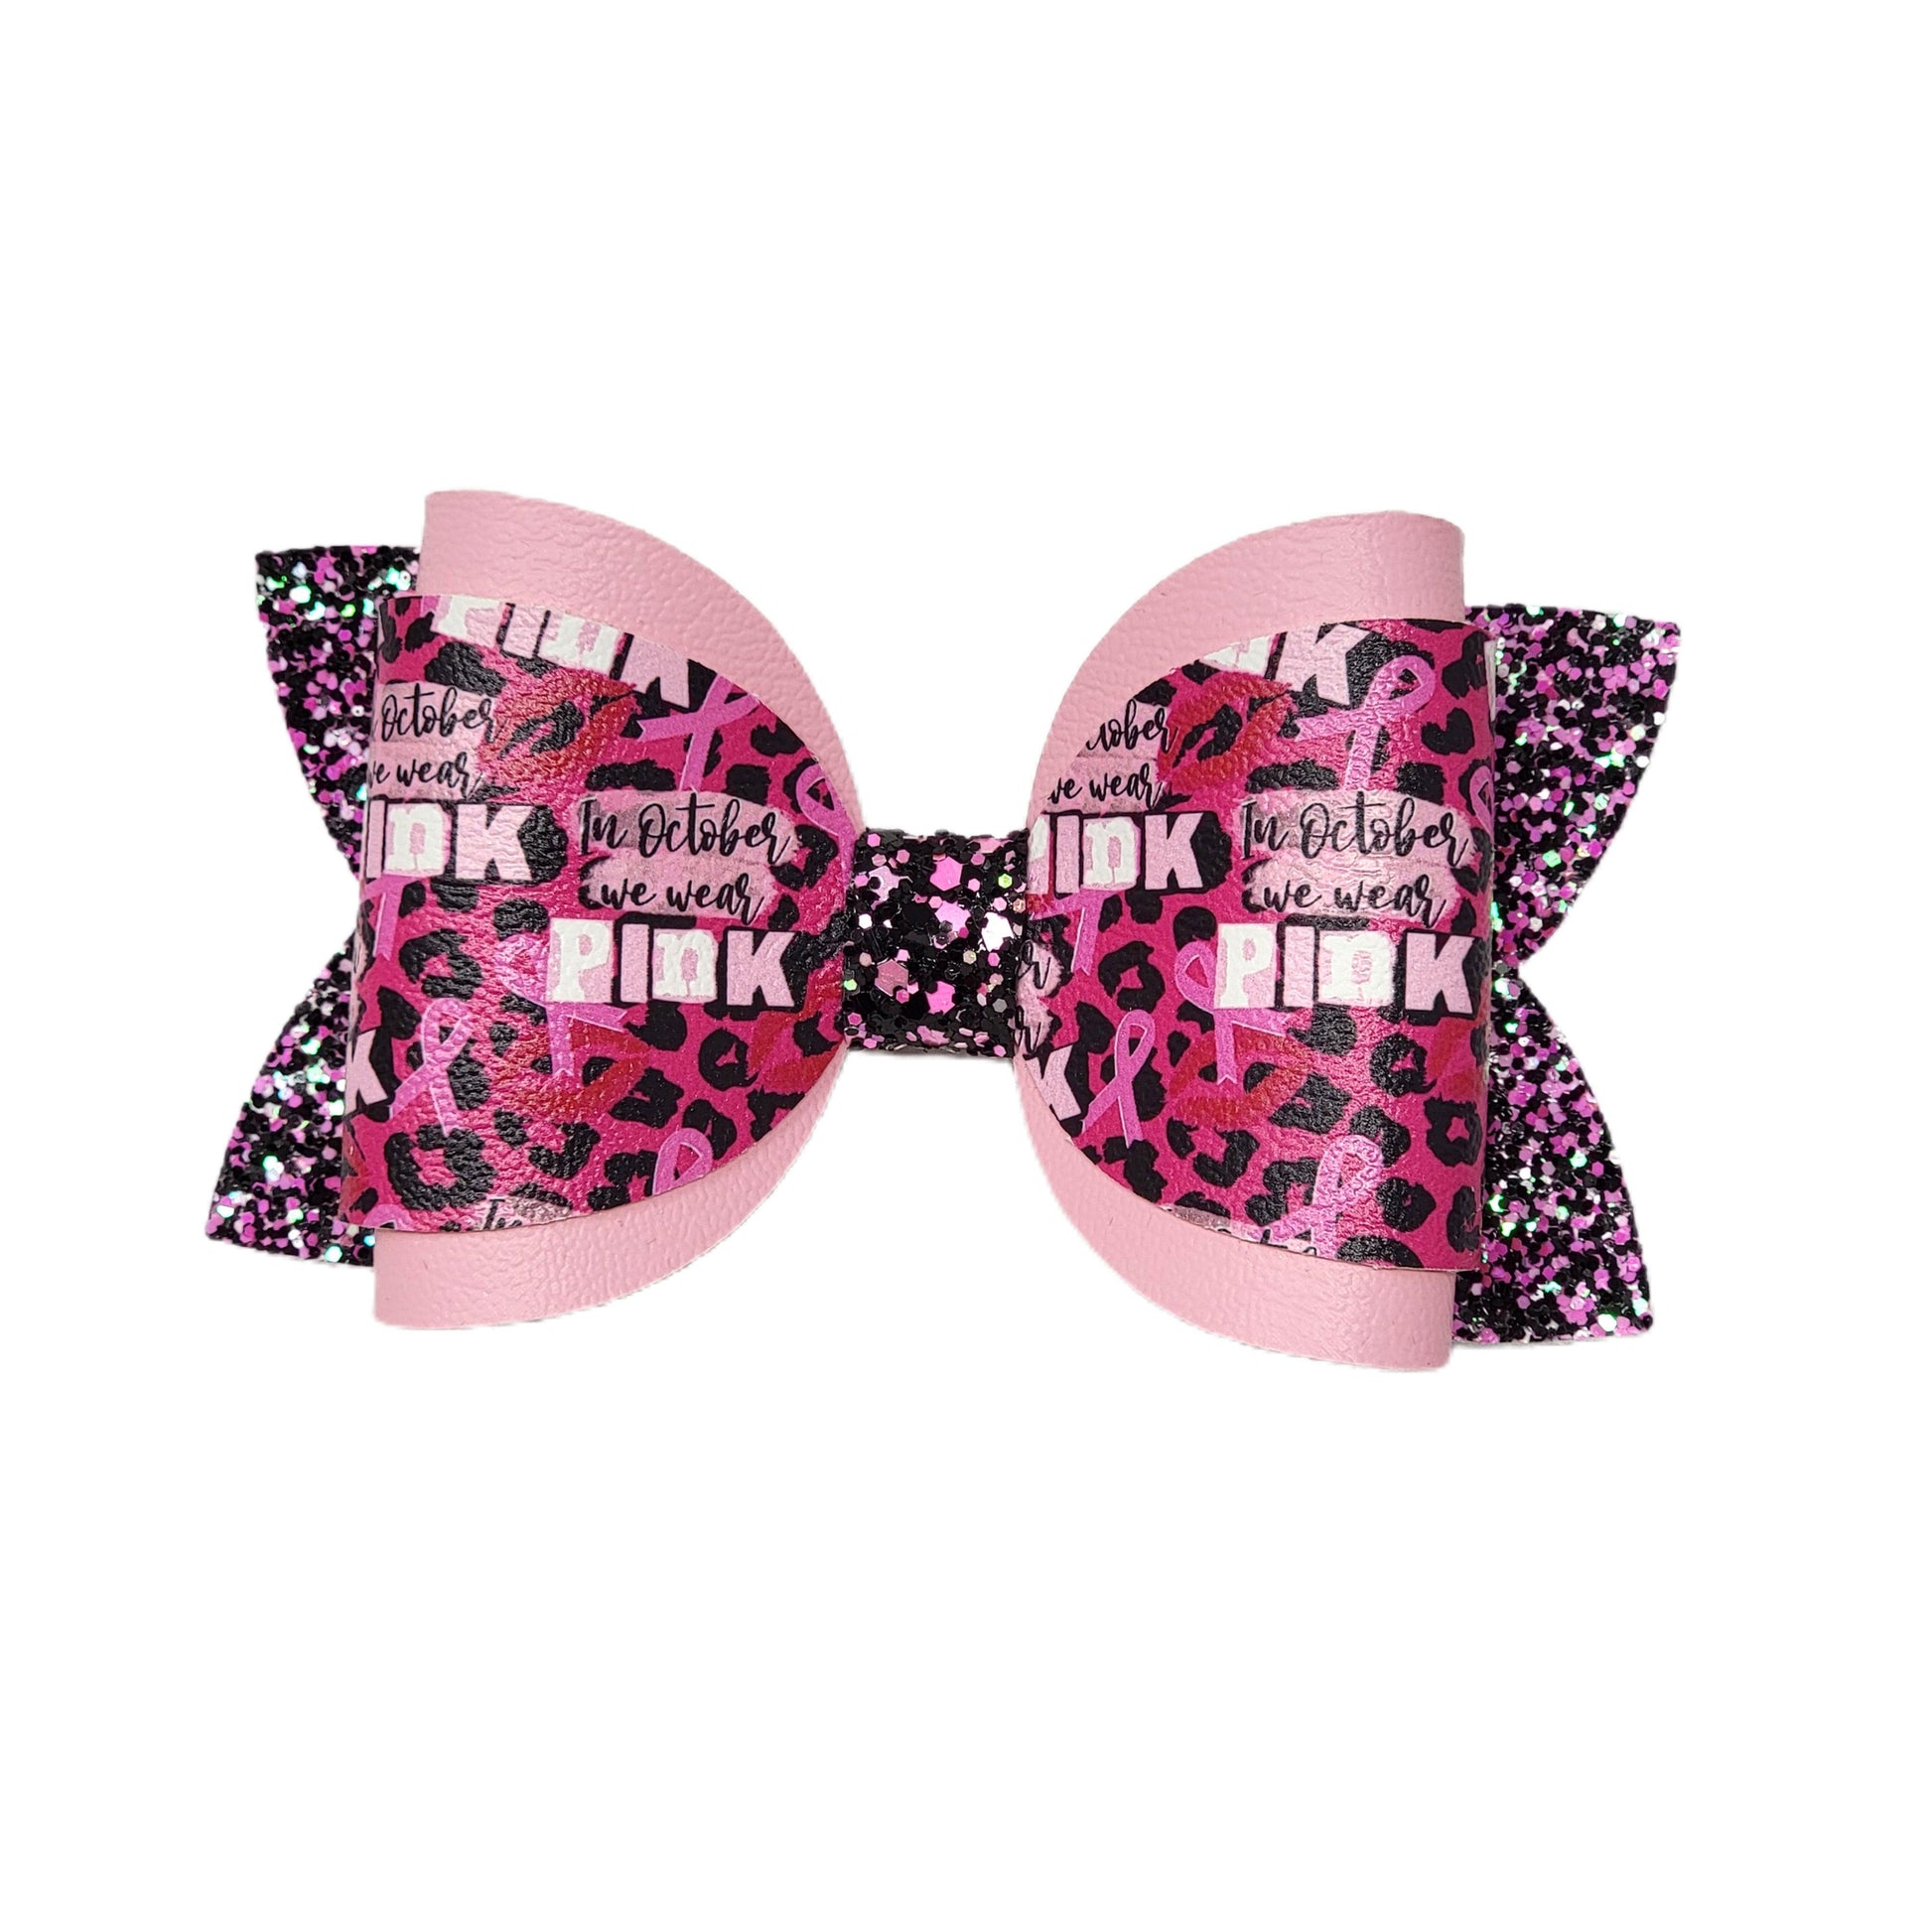 In October We Wear Pink Dressed-up Diva Bow 5"